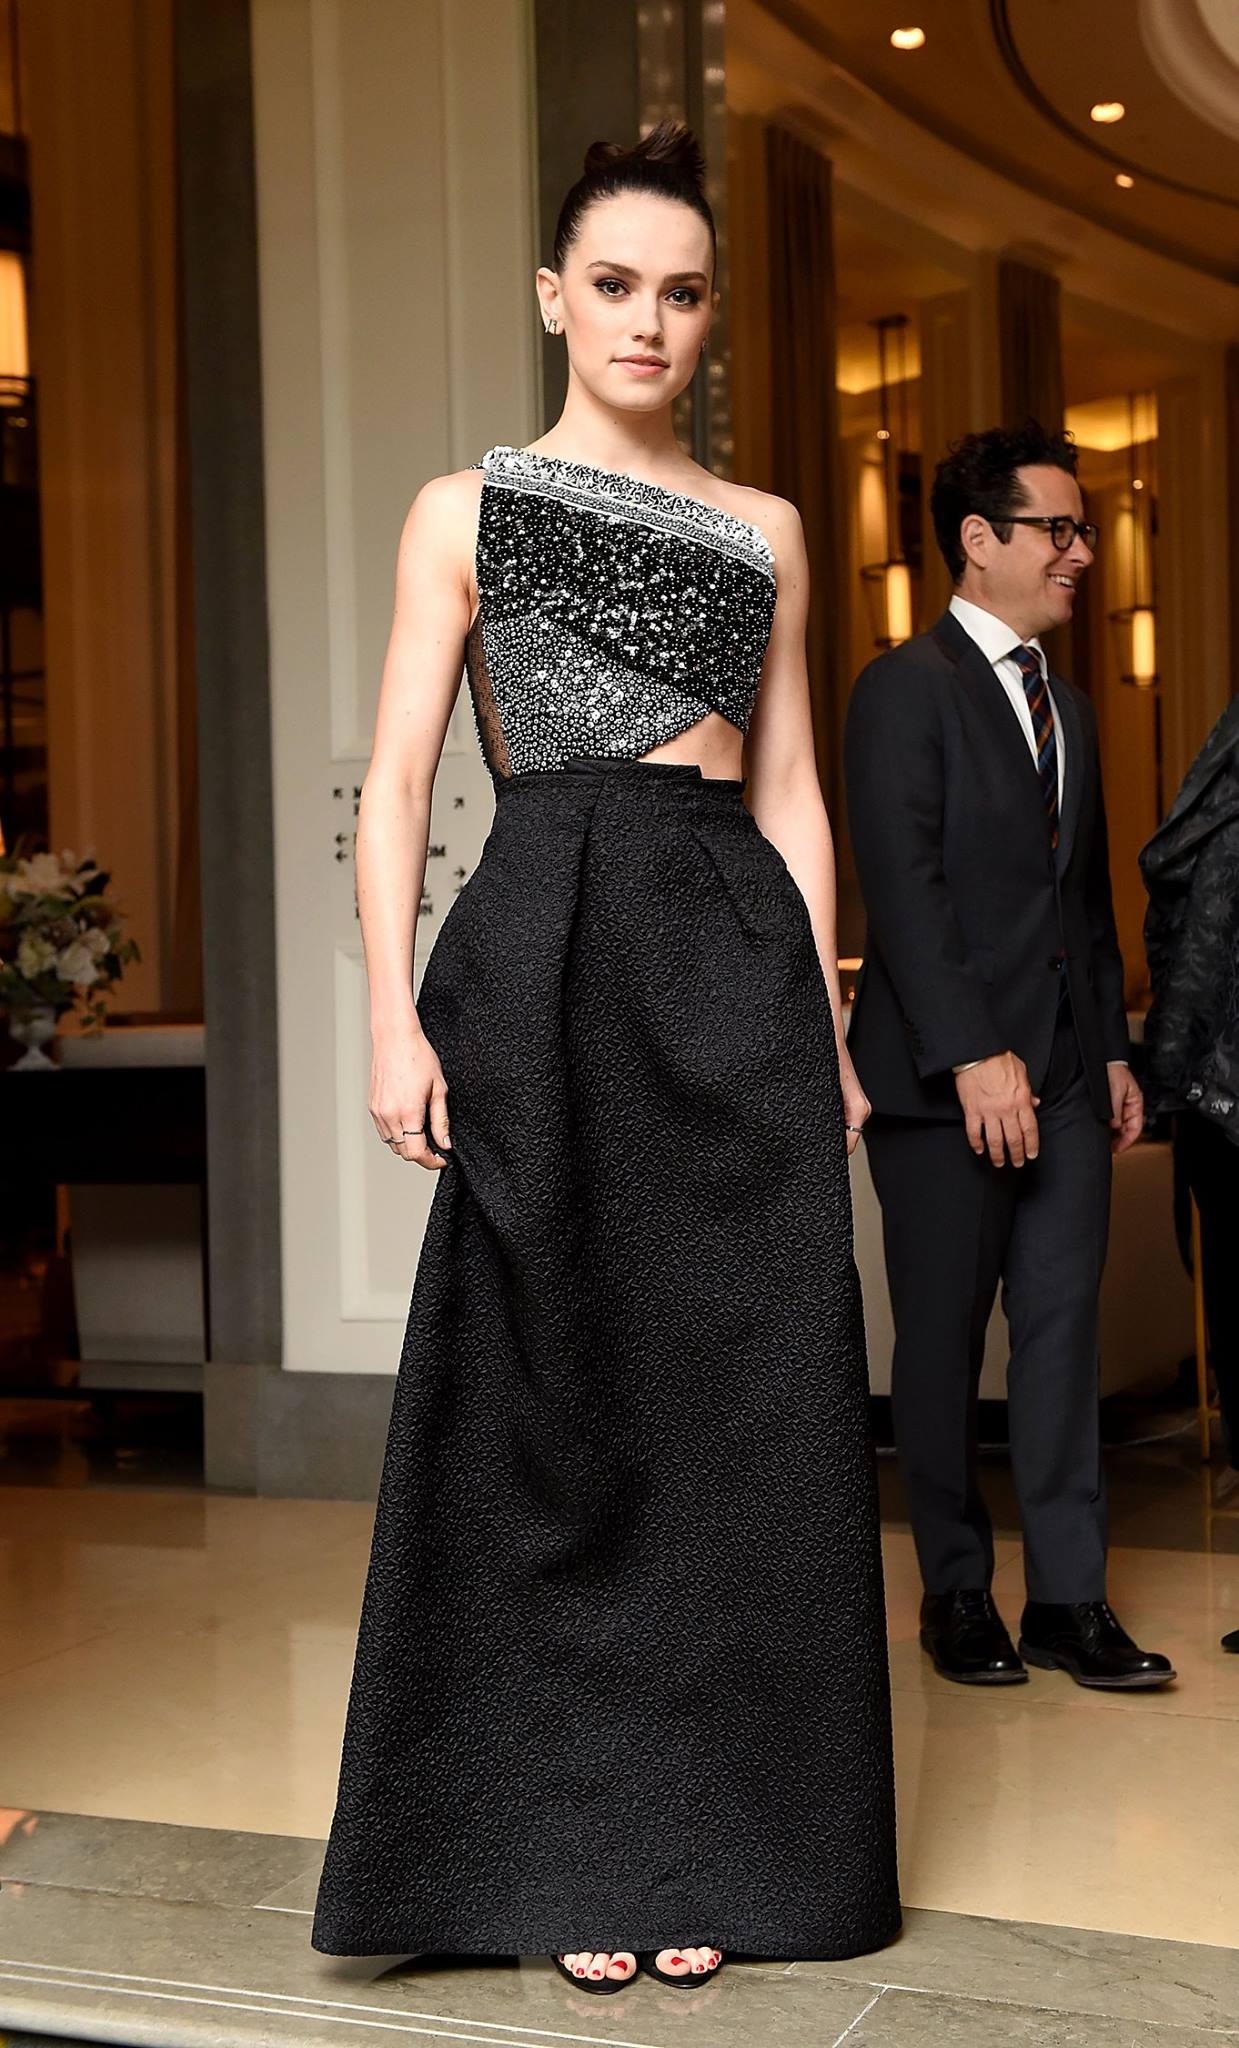 Daisy Ridley in a black sequined gown | Who2